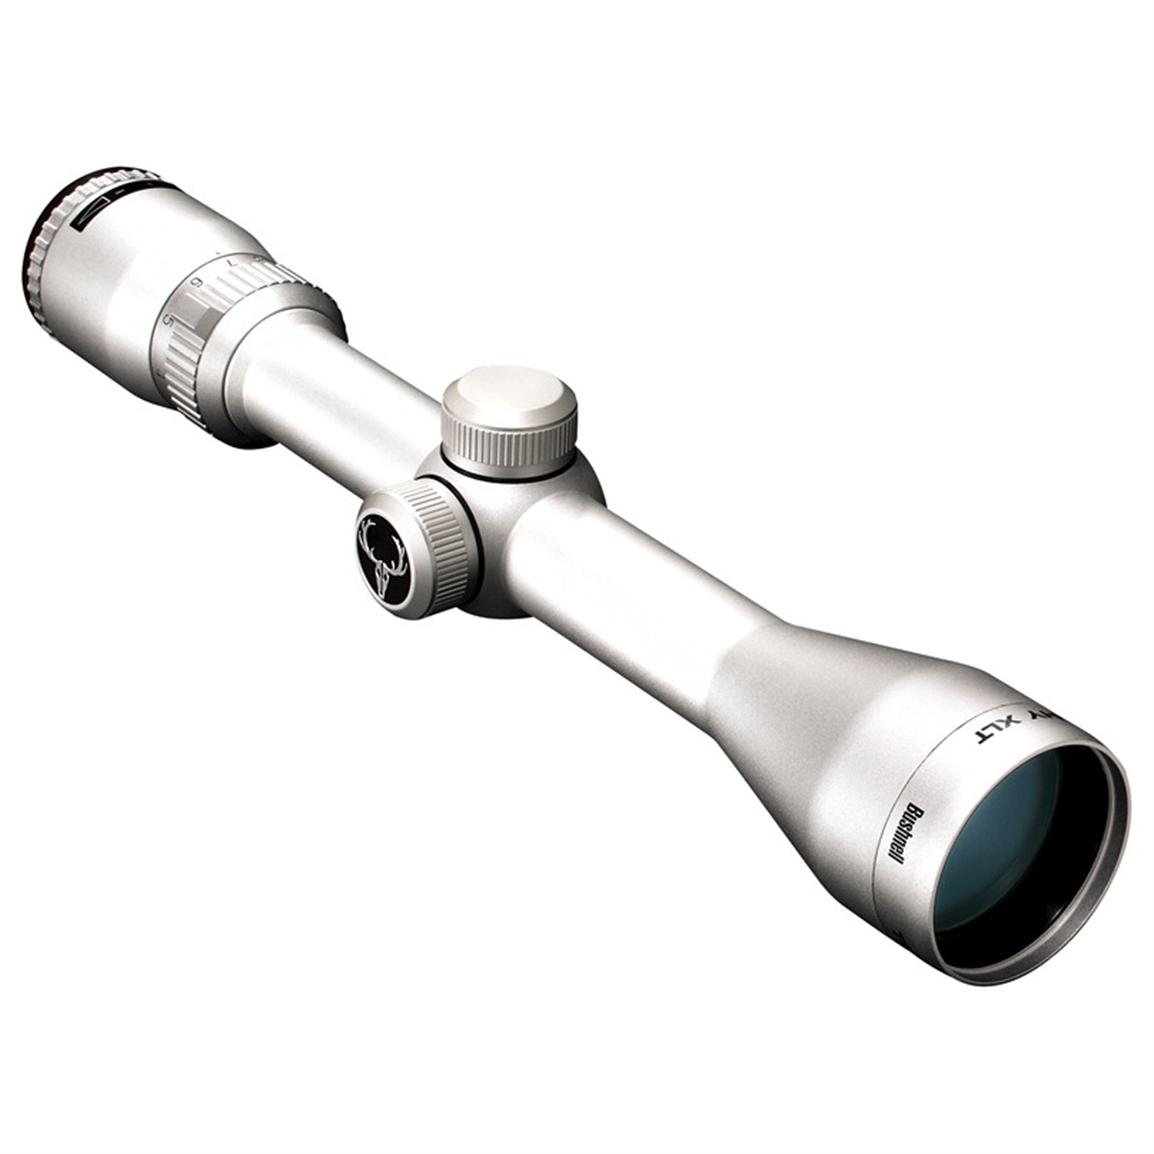 Bushnell® Trophy Xlt 3 9x40 Mm Multi X Riflescope Silver 210023 Rifle Scopes And 6350